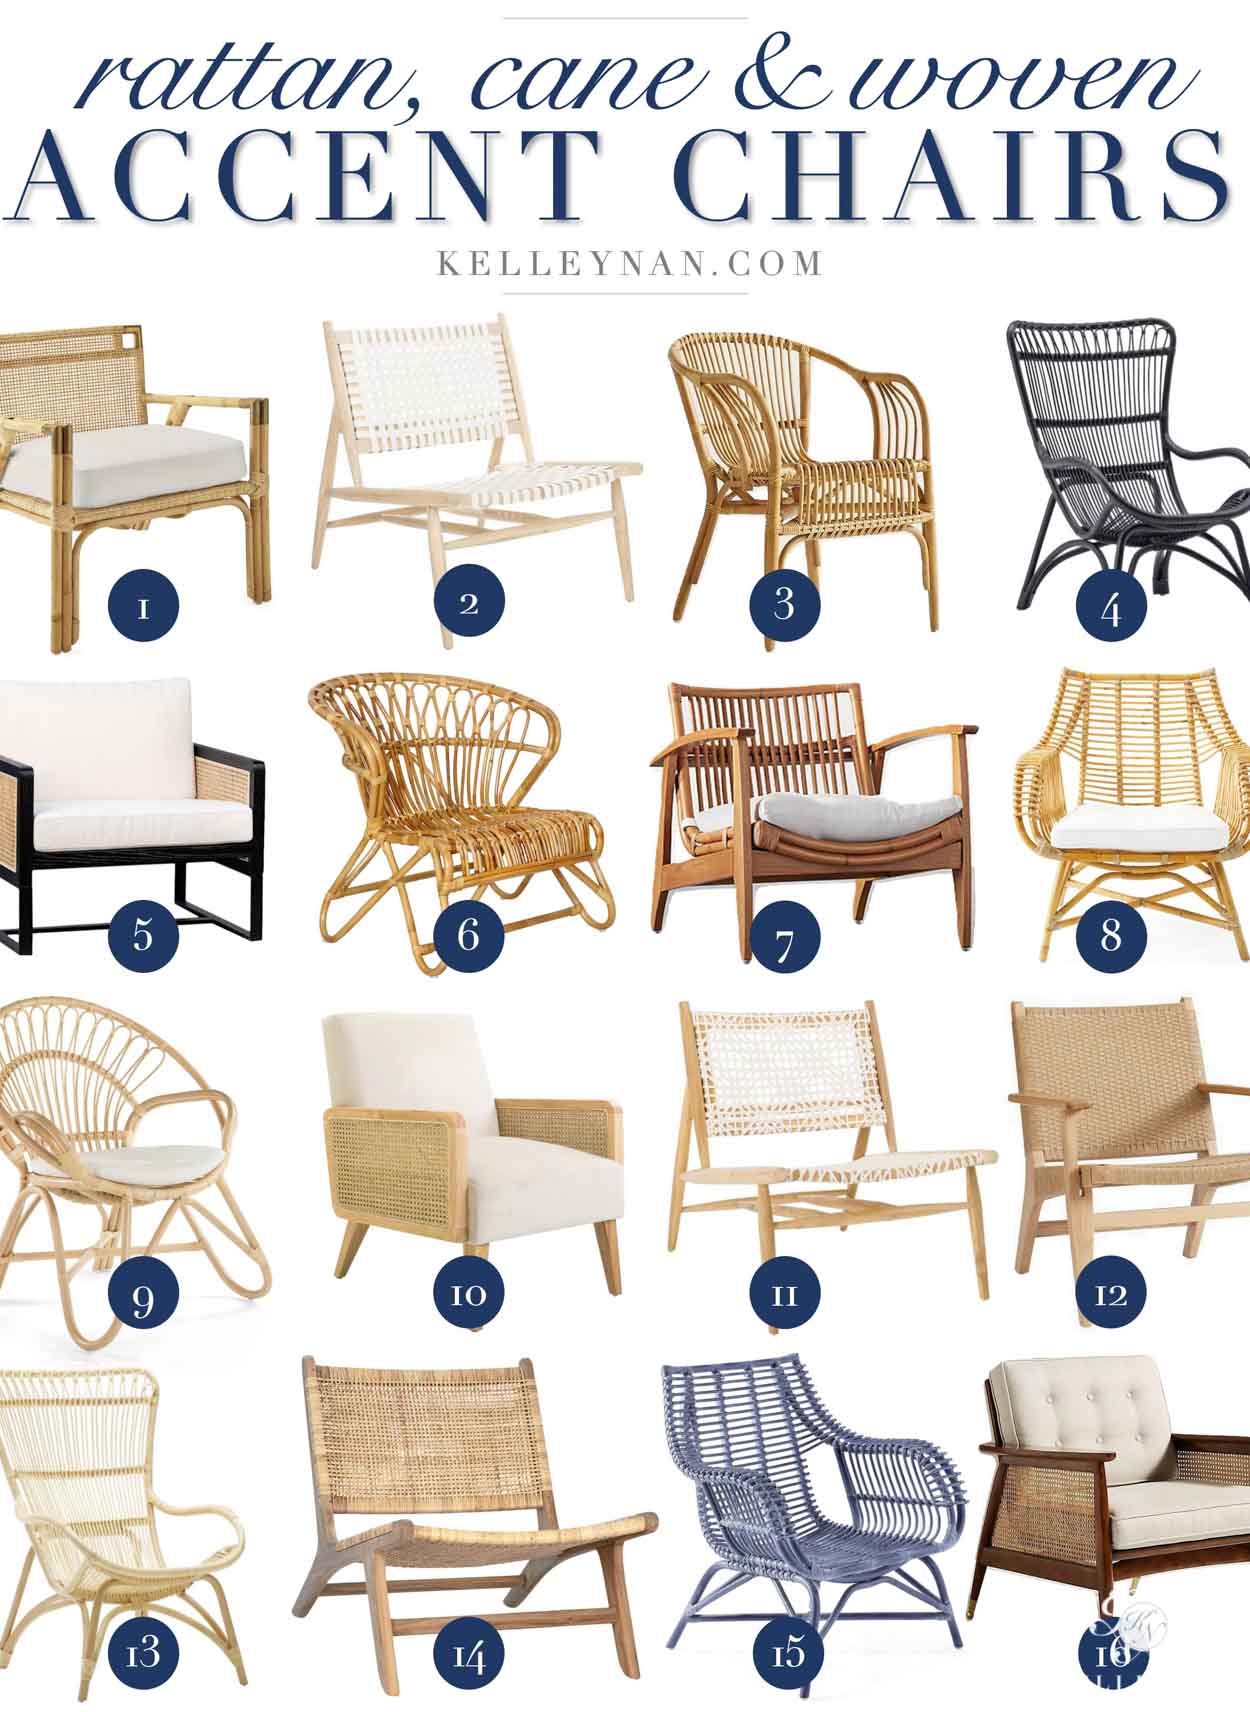 FEATURE Rattan Chairs Cane Chairs 